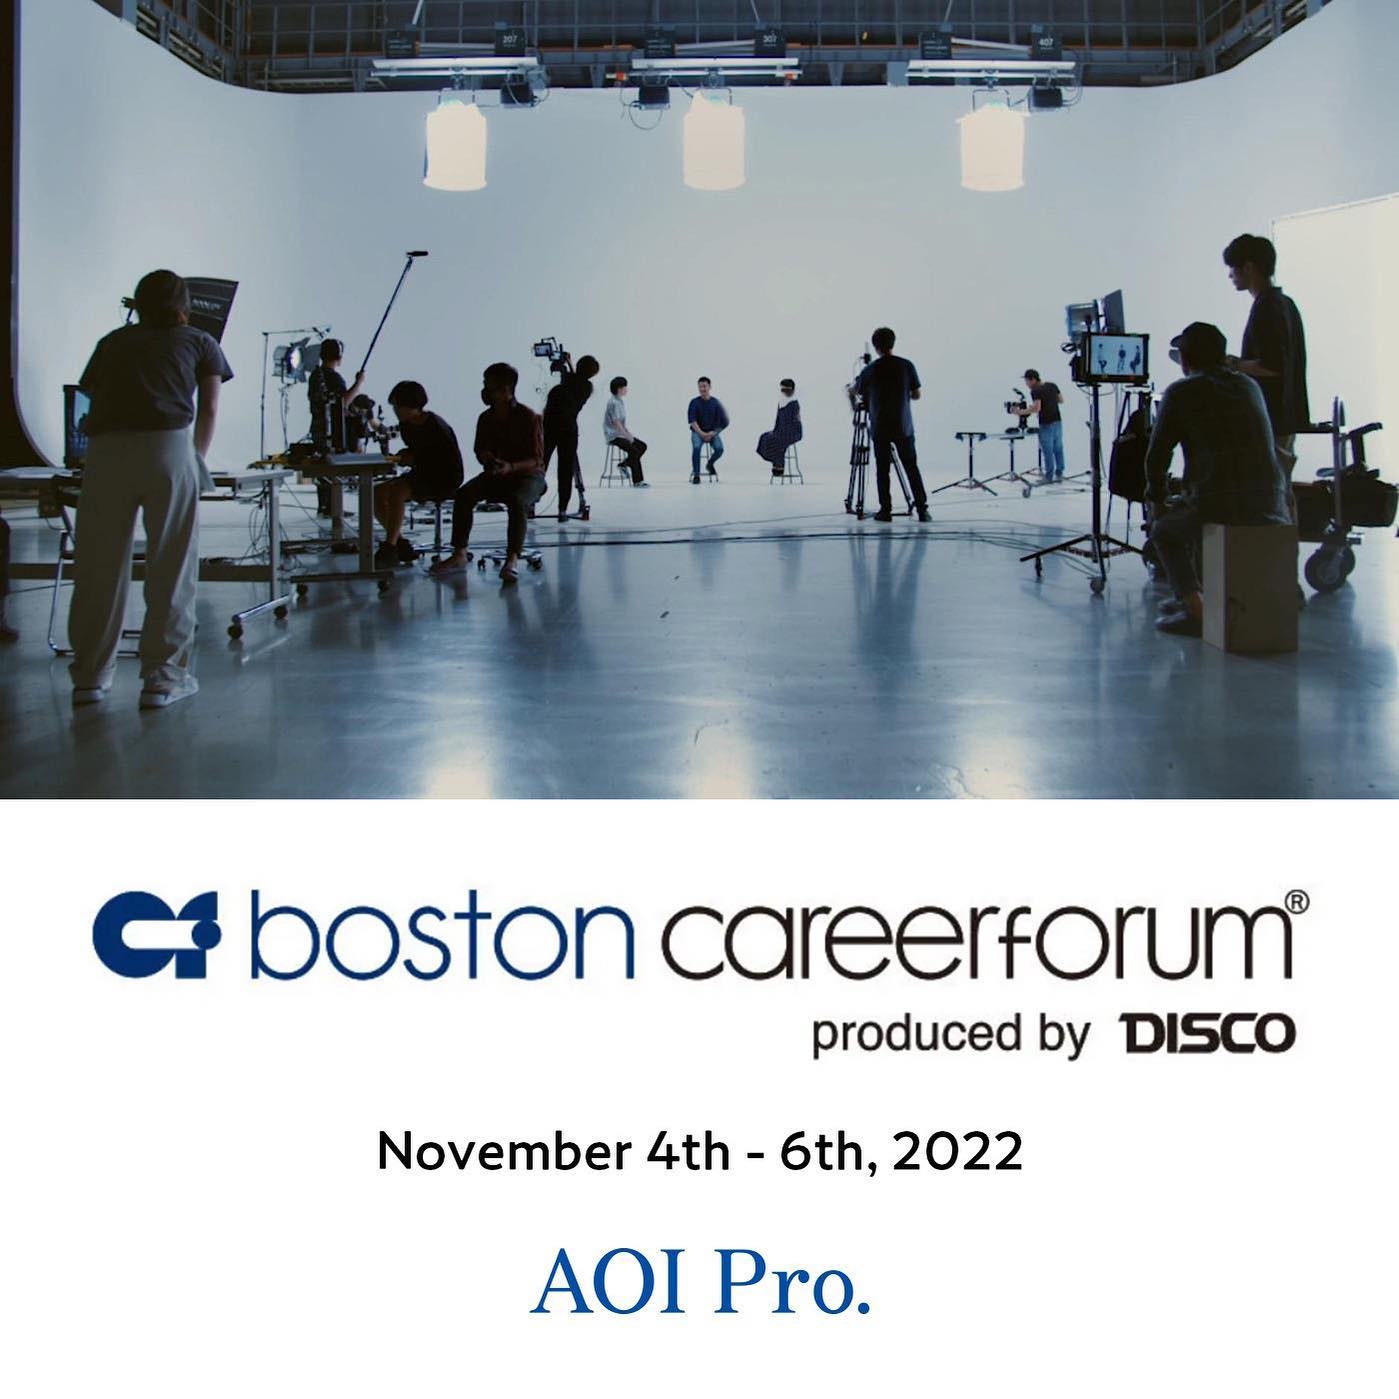 -
AOI Pro. will participate for the first time in the 2022, to be held in from November 4th to 6th.

Boston Career Forum is the world's largest job fair for Japanese-English Bilinguals. Over 150 companies from all over the world will come to Boston for three days.

AOI Pro. is one of Asiaʼs top film productions specializing in commercial film production as its core business. AOI Pro. has a global division consisting of in-house bilingual producers, as well as production bases in Malaysia, Indonesia, California and others, which enables the company to take on global projects.

Come join our commercial film production team working in the global field. 
We look forward to meeting many of you at the Boston Career Forum!

Register for Boston Career Forum 2022
https://careerforum.net/en/event/bos/

AOI Pro. Inc.'s Company Profile
https://careerforum.net/en/company_list/2335/company_detail/

・・・
@aoirecruit 
@aoipro
・・・